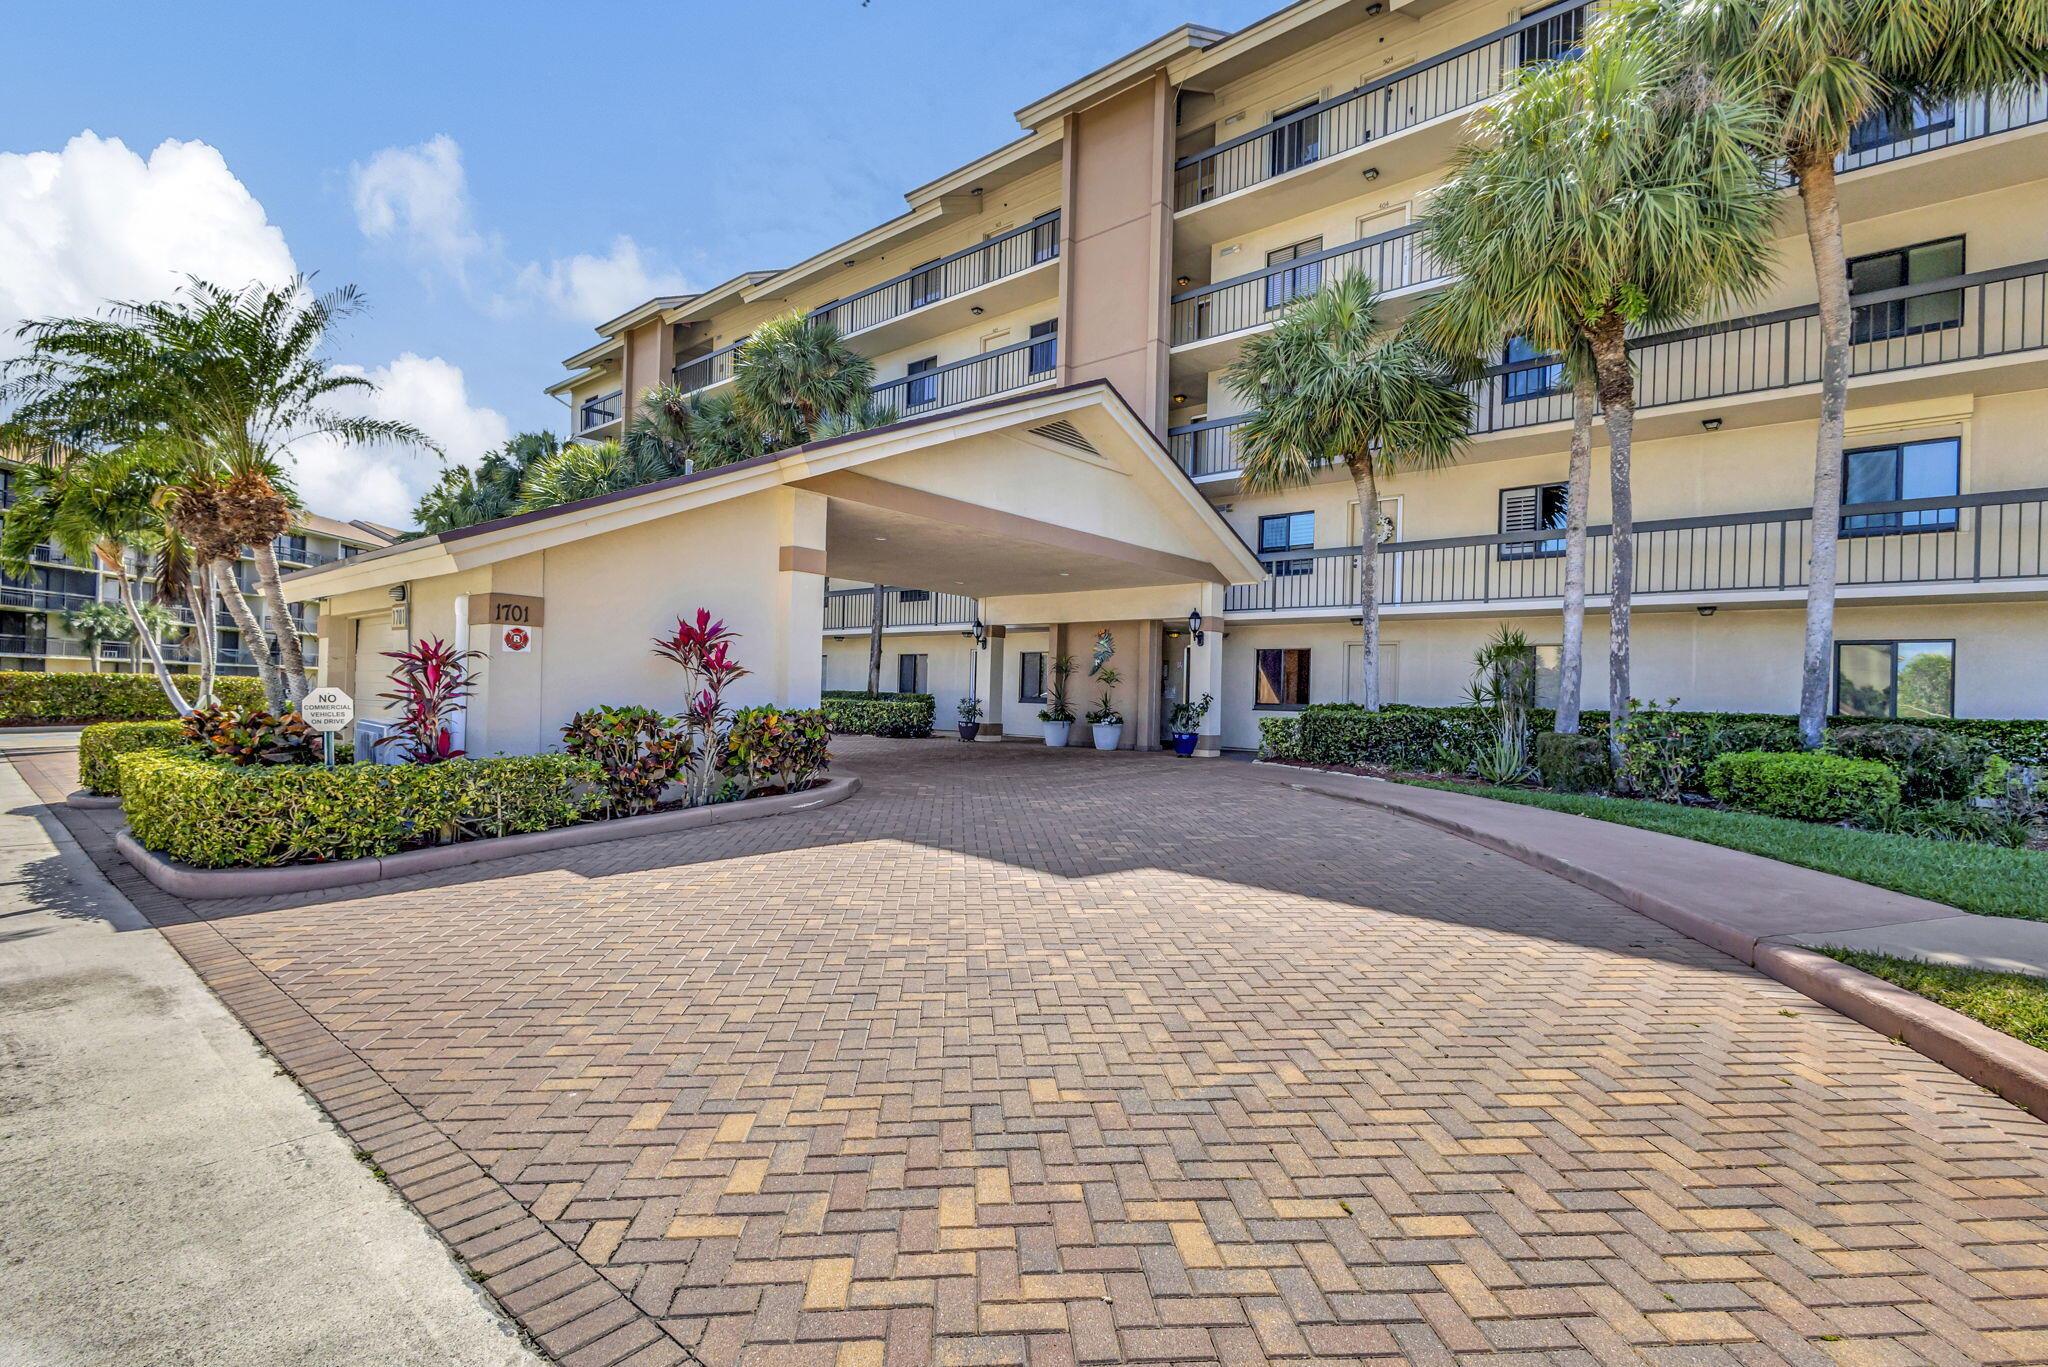 2/2 4th floor condo in the sought after community of The Bluffs in Jupiter. Nestled along the serene waterfront, this impeccably maintained condominium offers a tranquil retreat ready for immediate occupancy. Its pristine condition and move-in readiness promise a seamless transition into a lifestyle defined by coastal elegance and picturesque views.